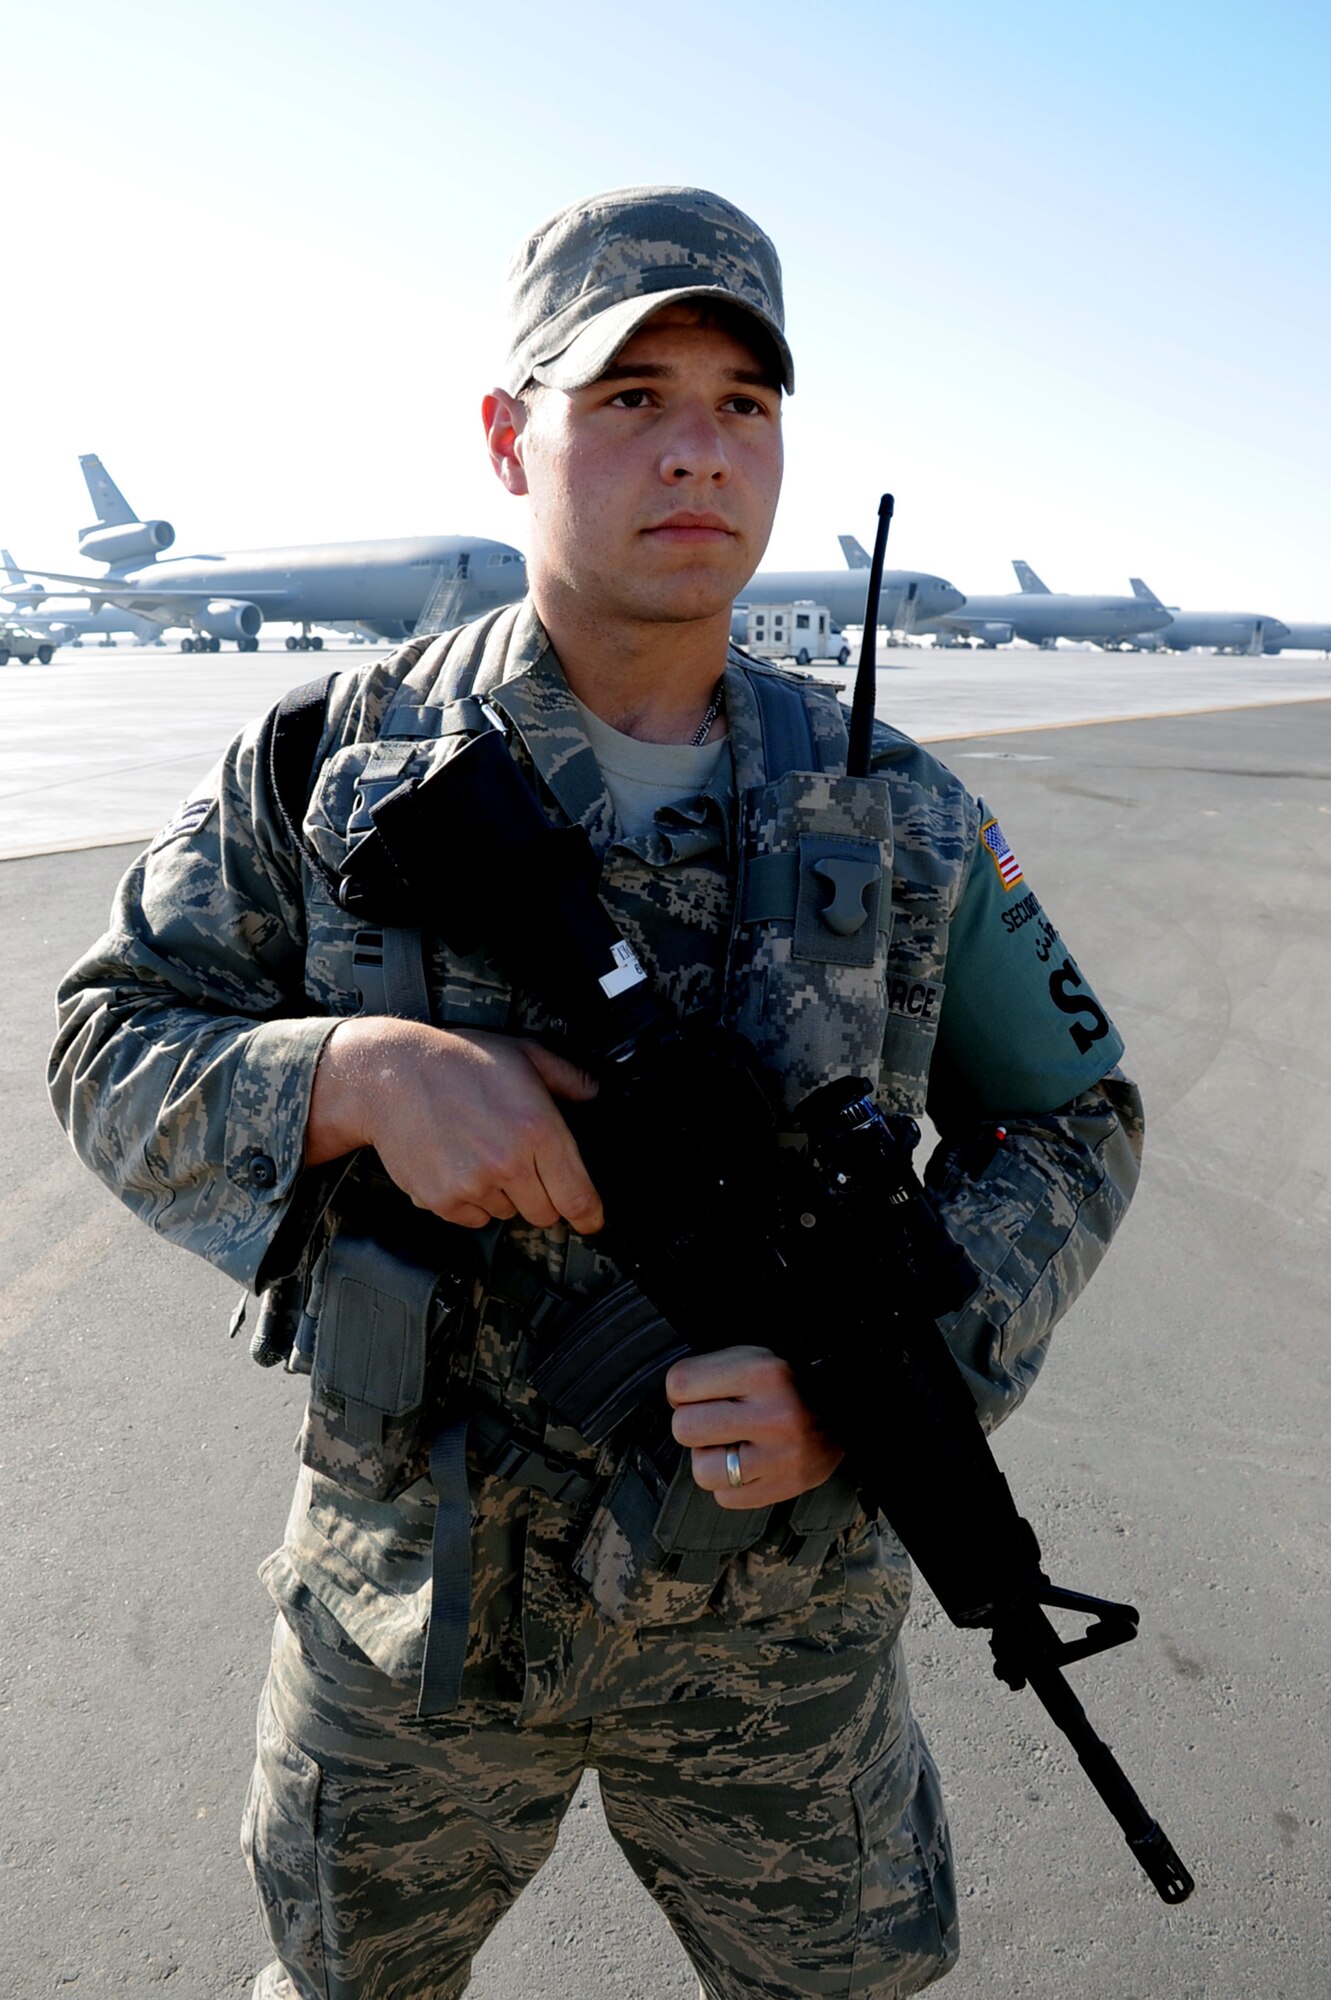 Airman 1st Class Andrew Opel, 380th Expeditionary Security Forces Squadron, watches over the flightline at a non-disclosed base in Southwest Asia on Jan. 8, 2010.  The 380th ESFS and the 380th Air Expeditionary Wing support Operations Iraqi Freedom and Enduring Freedom and the Combined Joint Task Force-Horn of Africa.  Airman Opel is deployed from the 96th Security Forces Squadron at Eglin AFB, Fla., and his hometown is Cumberland, Md. (U.S. Air Force Photo/Tech. Sgt. Scott T. Sturkol/Released)